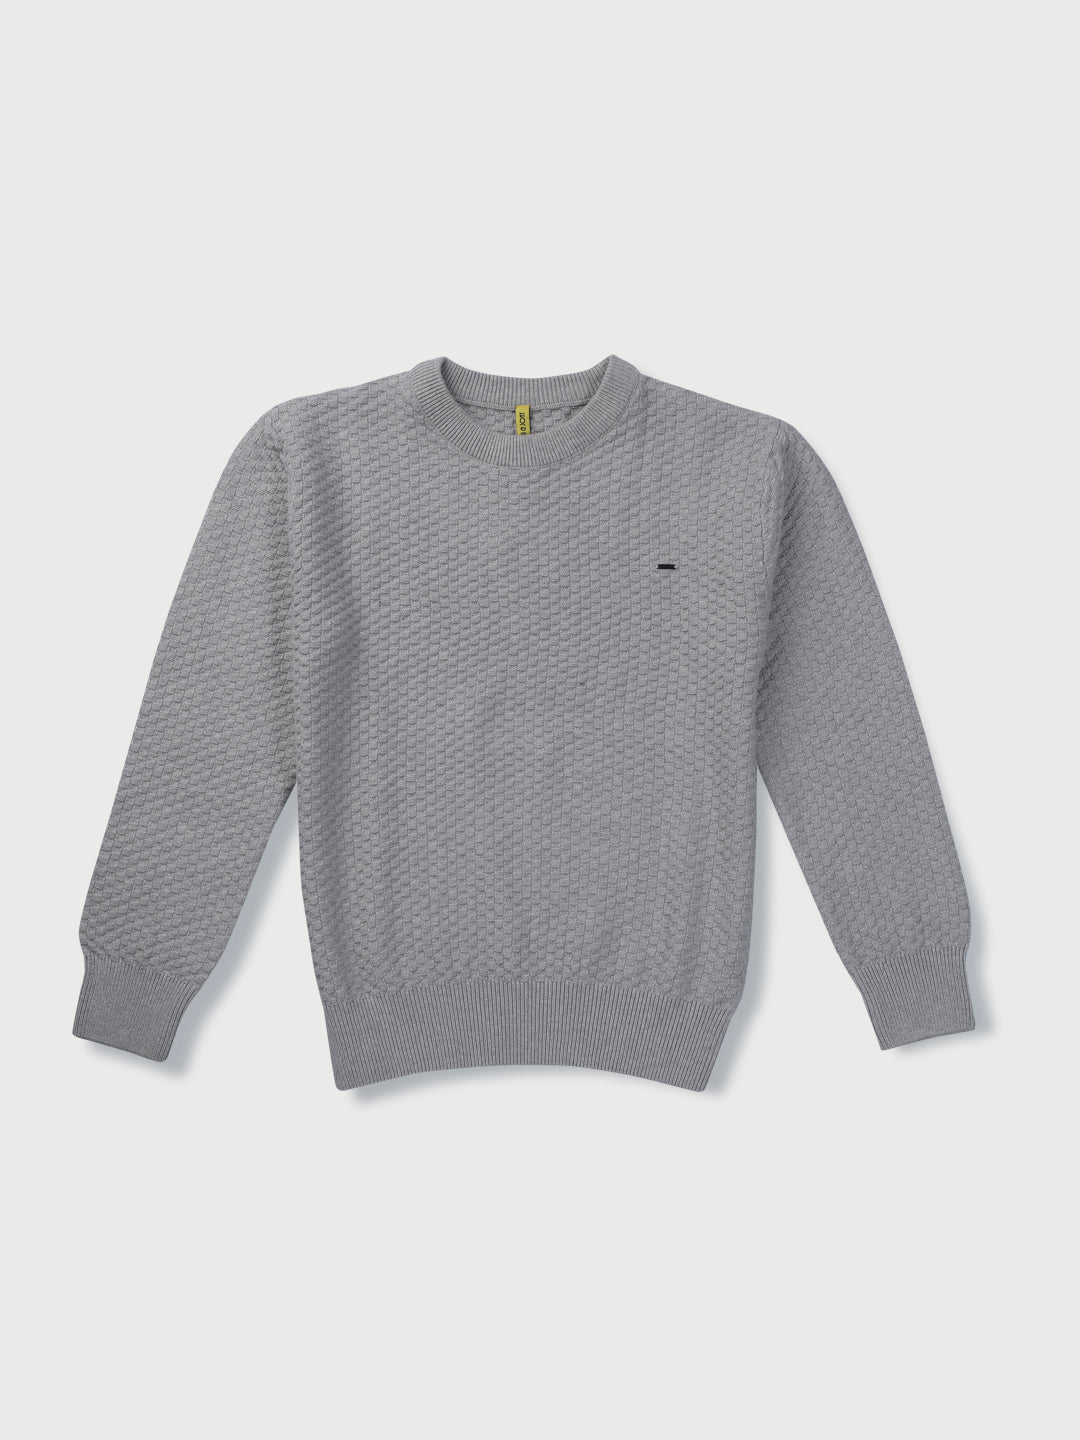 Boys Grey Solid Woven Sweater